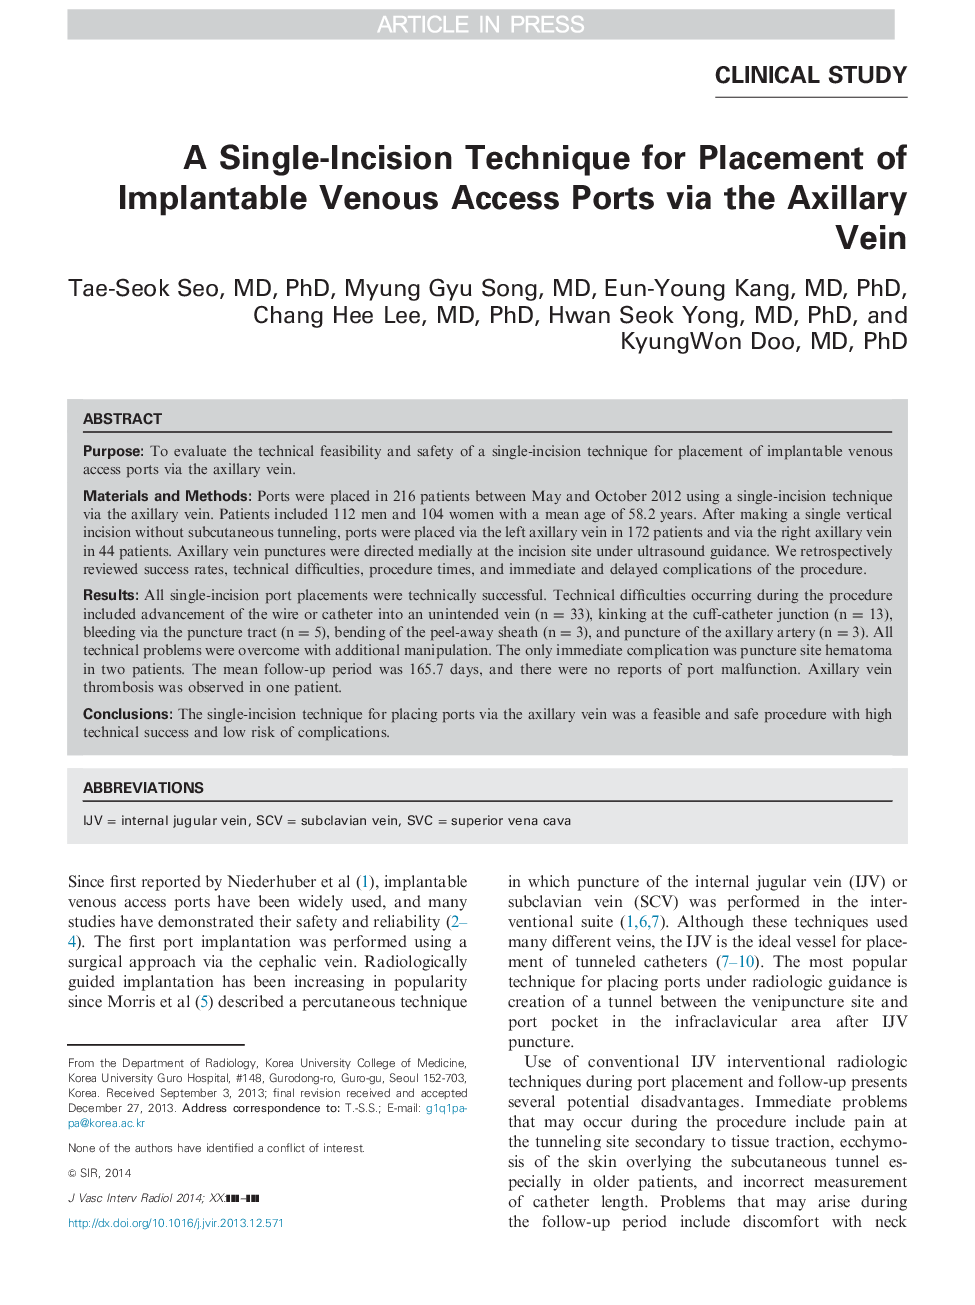 A Single-Incision Technique for Placement of Implantable Venous Access Ports via the Axillary Vein